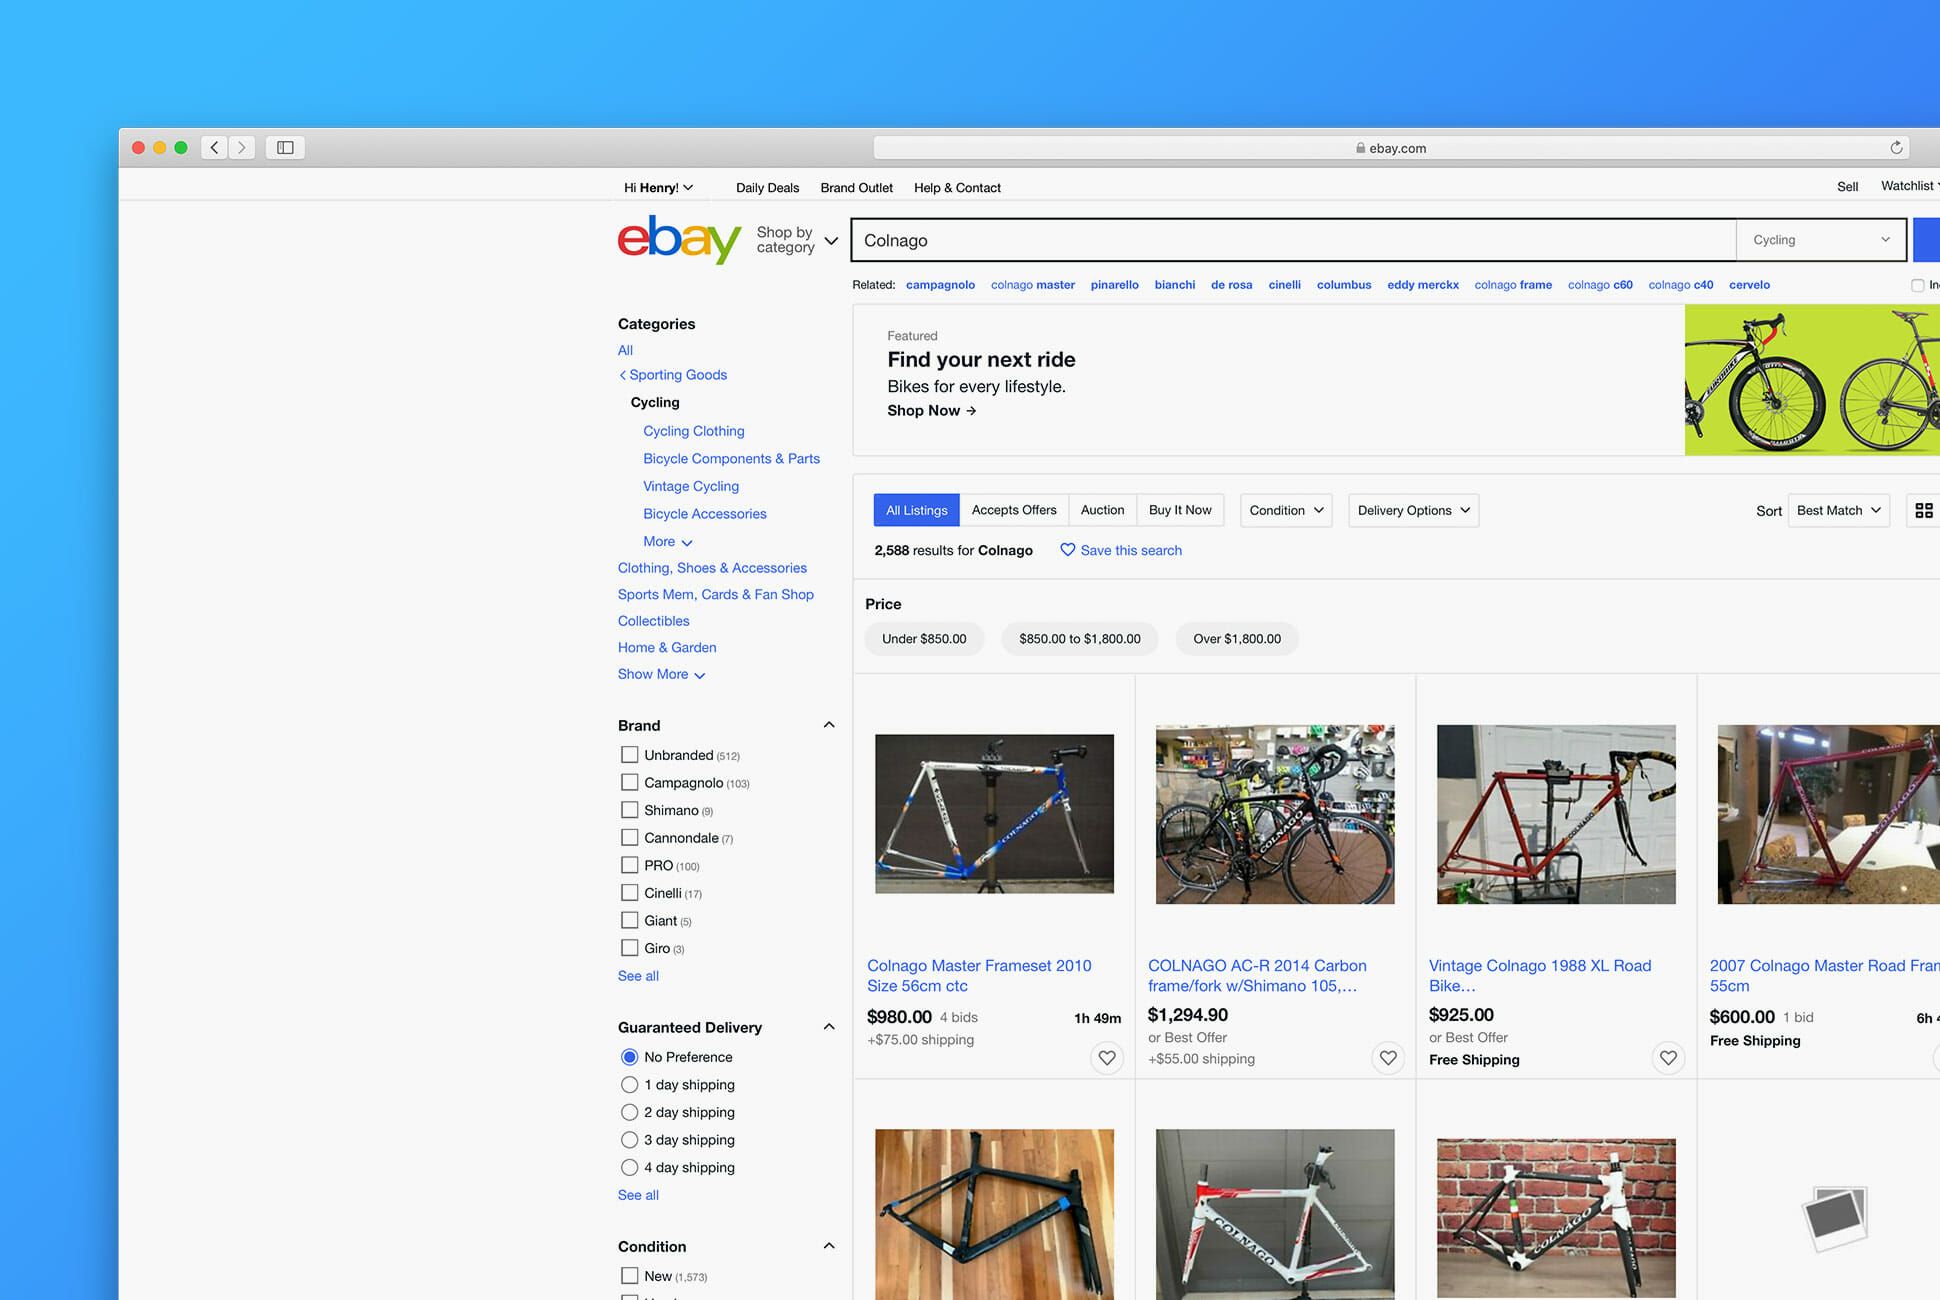 Shopping for a Used Bike? Heres How to Get One on the Internet